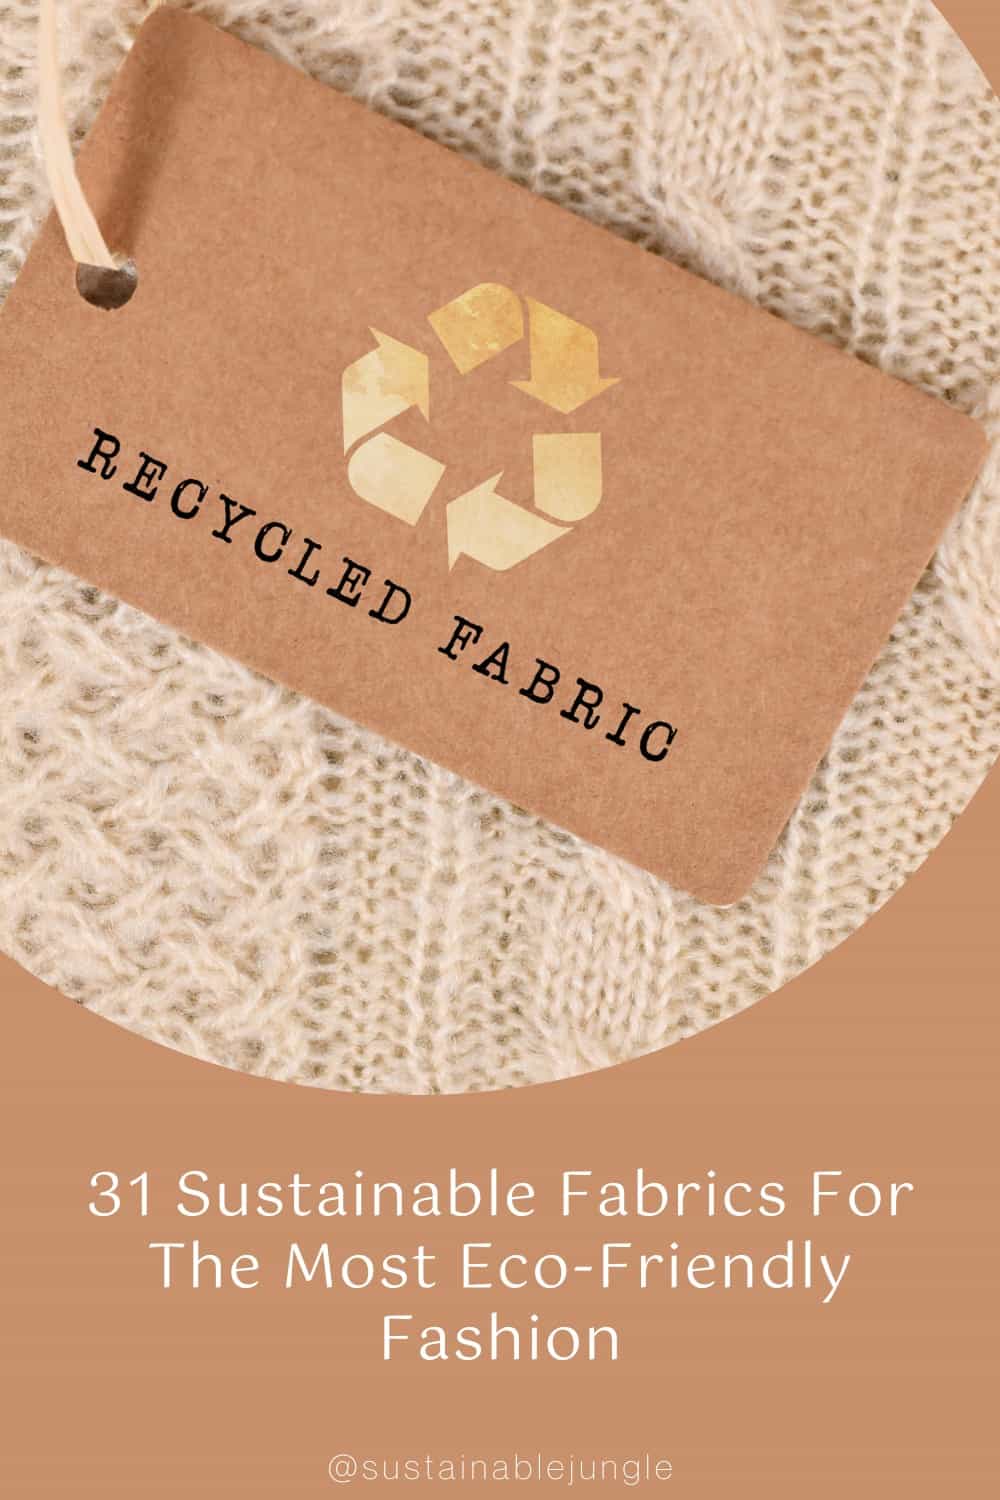 31 Sustainable Fabrics For The Most Eco-Friendly Fashion #sustainablefabrics #listofsustainablefabrics #whatarethebestsustainablefabrics #sustainablefabricsforclothing #ecofriendlyfabrics #mostecofriendlyfabrics #sustainablejungle Image by Firn from Firn via Canva Pro